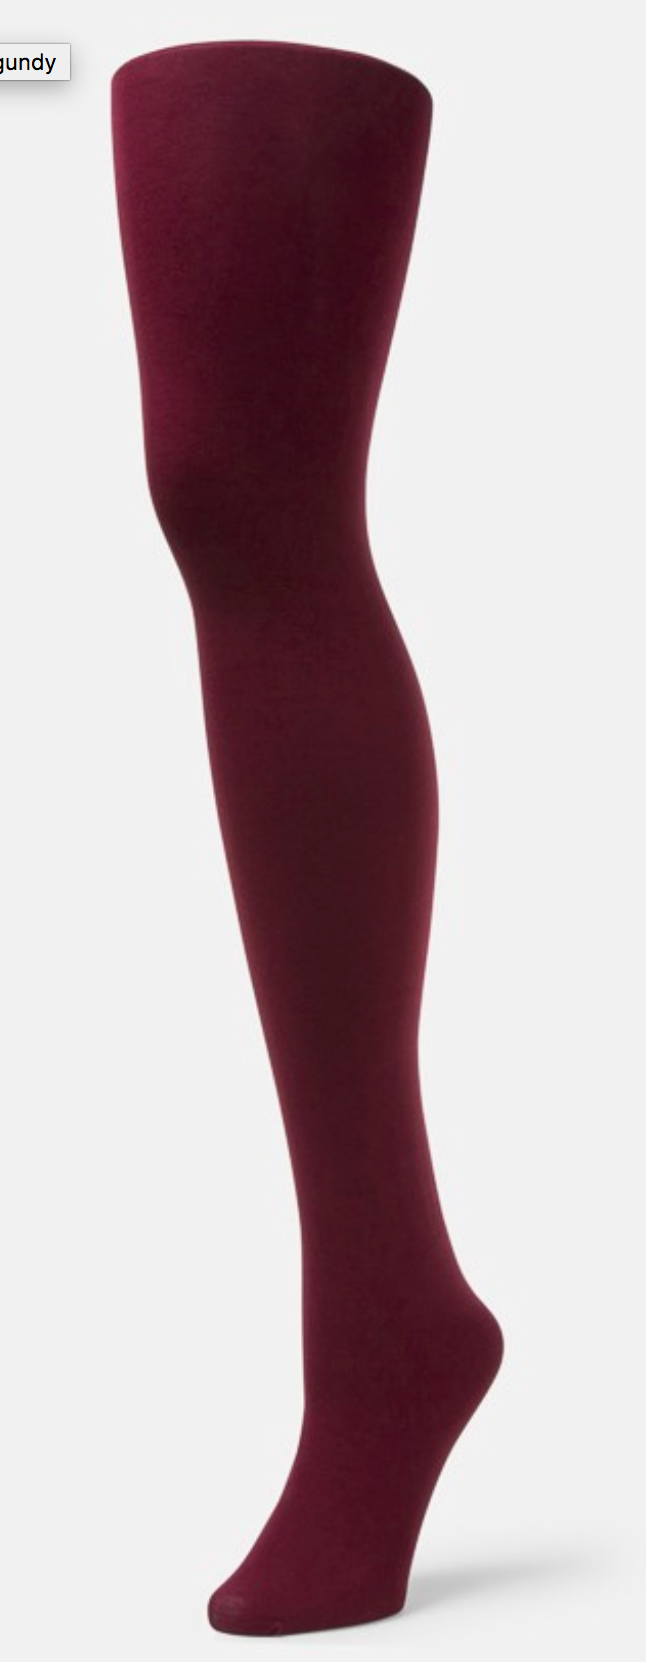 Women's Organic Cotton Tights -Striped (size S)  Cotton tights, Clothes  encounters, Socks women